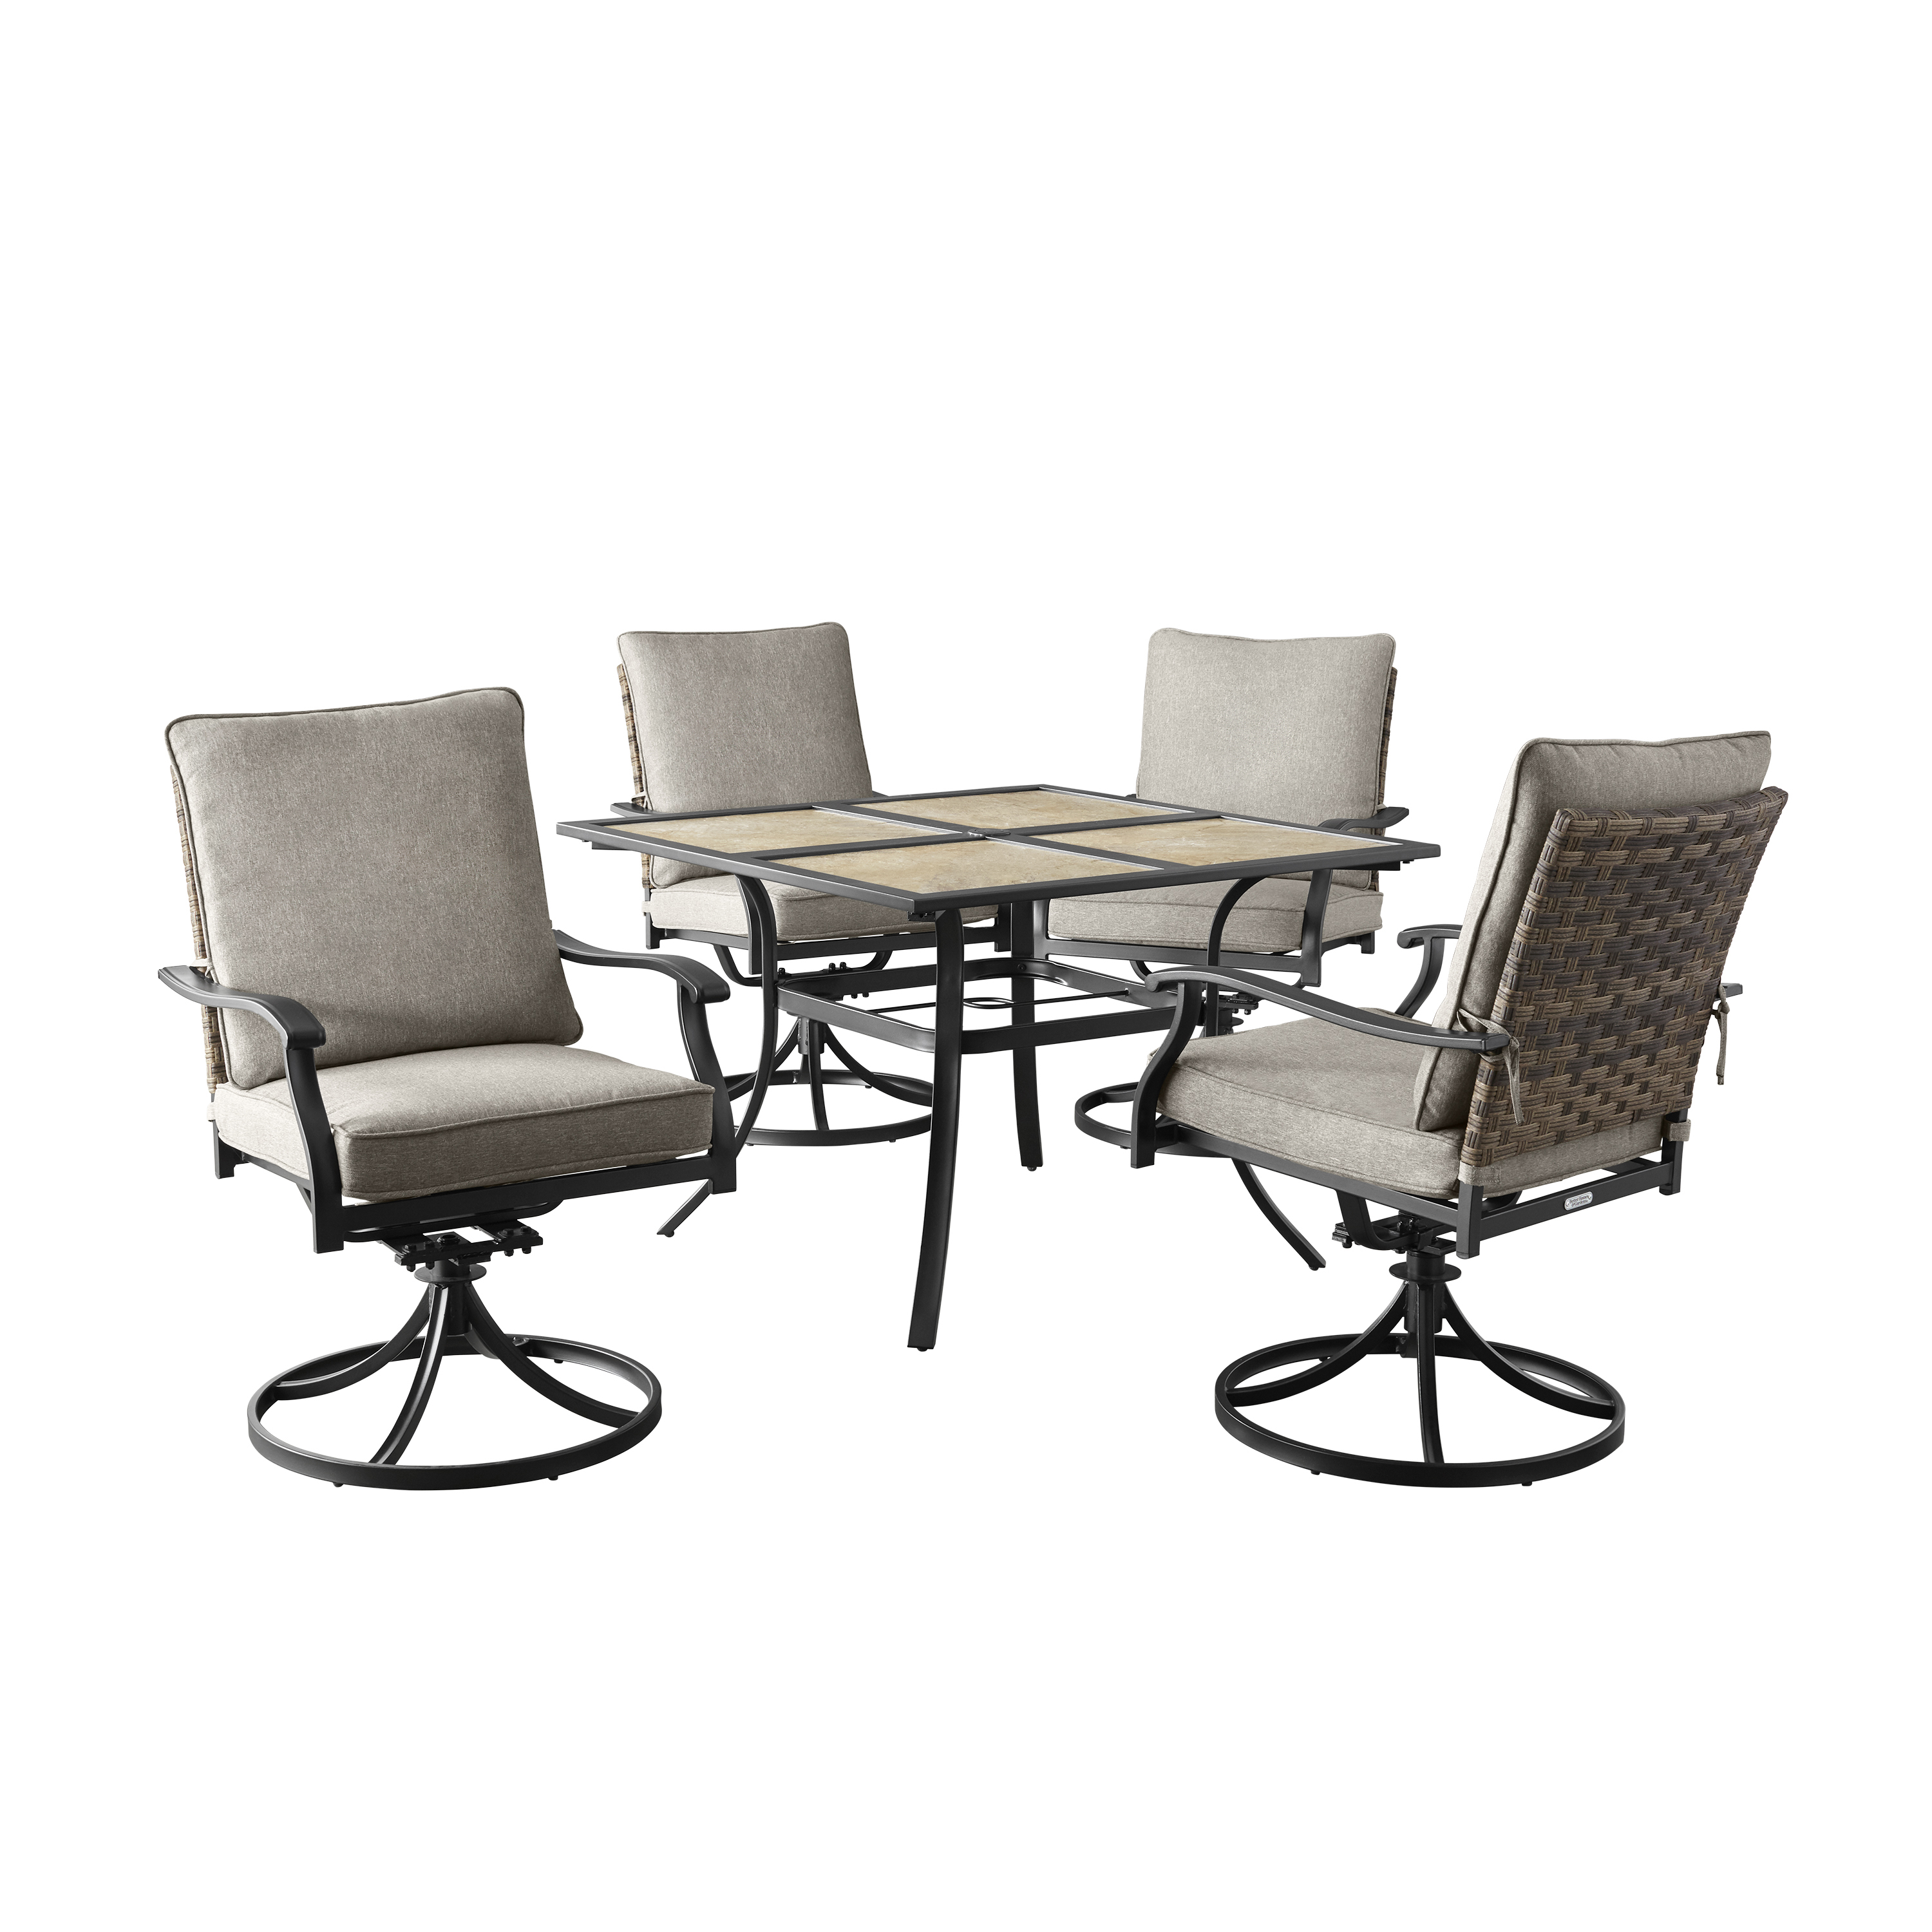 Better Homes & Gardens Elmdale 5-Piece Outdoor Dining Set - image 2 of 8